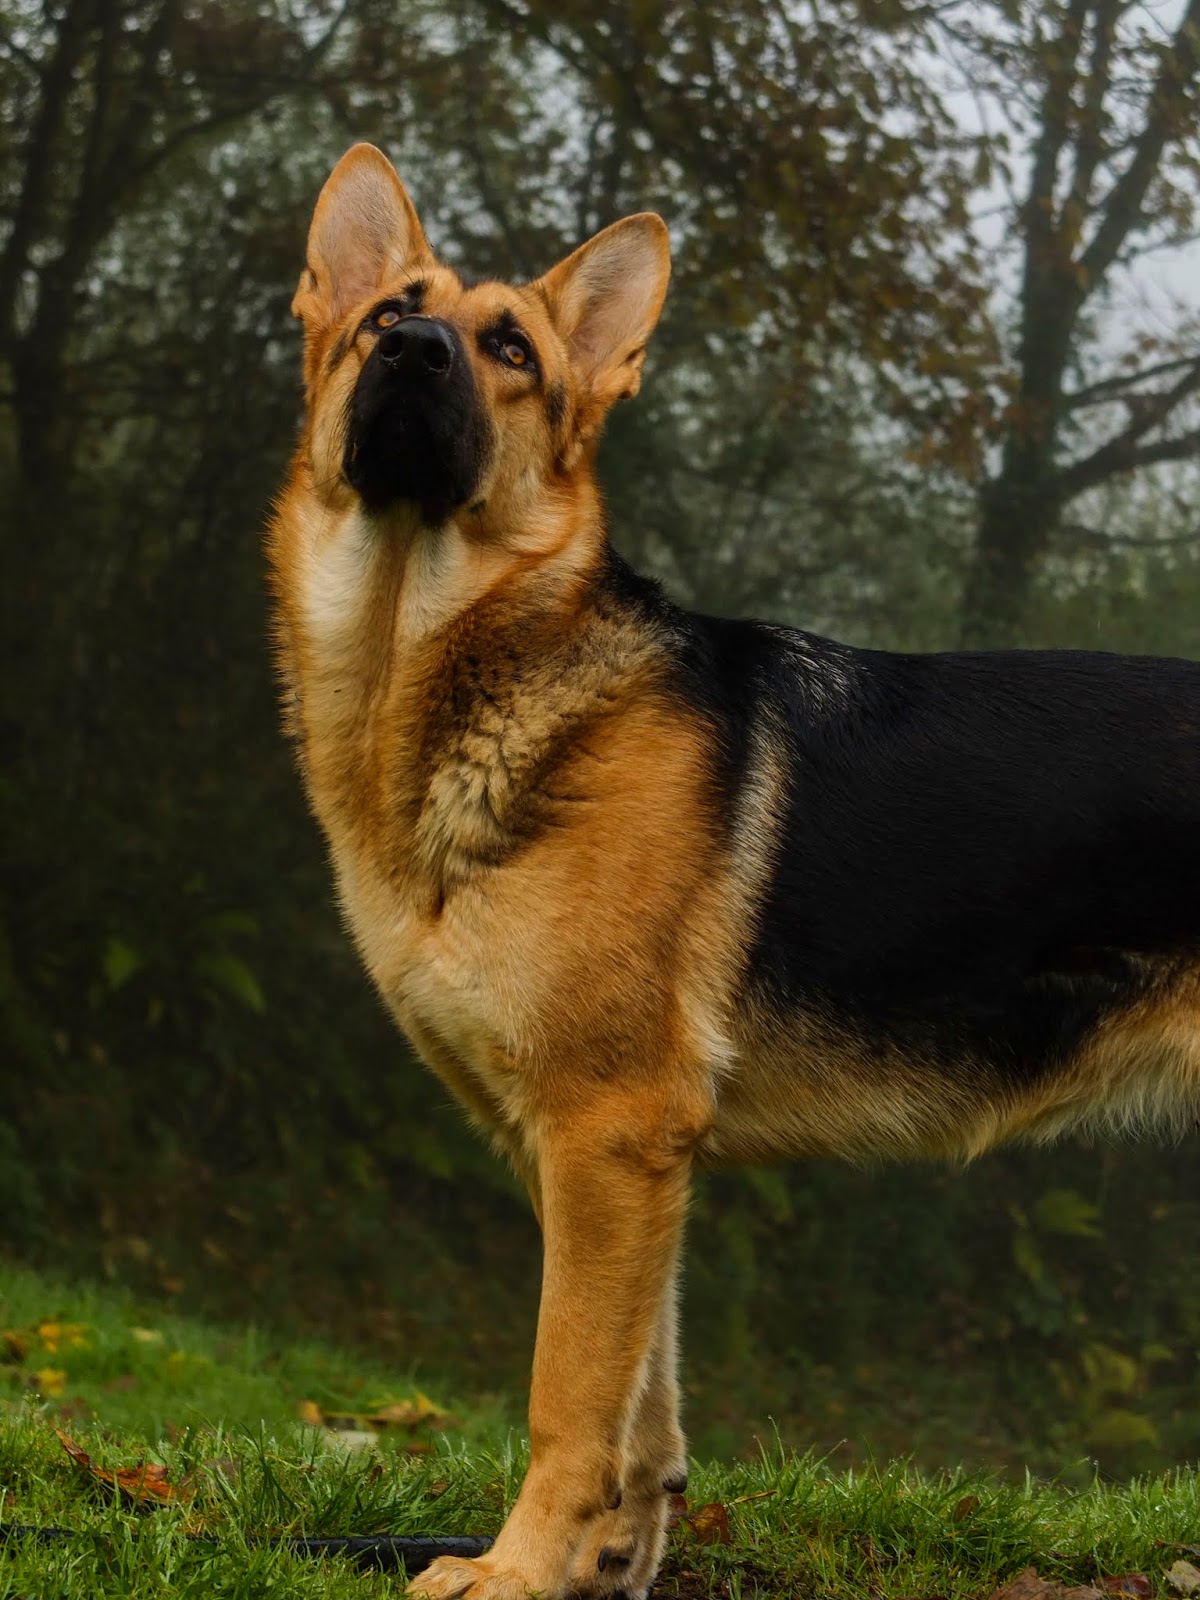 A 6 month old German Shepherd Nala sniffing the foggy, misty air.